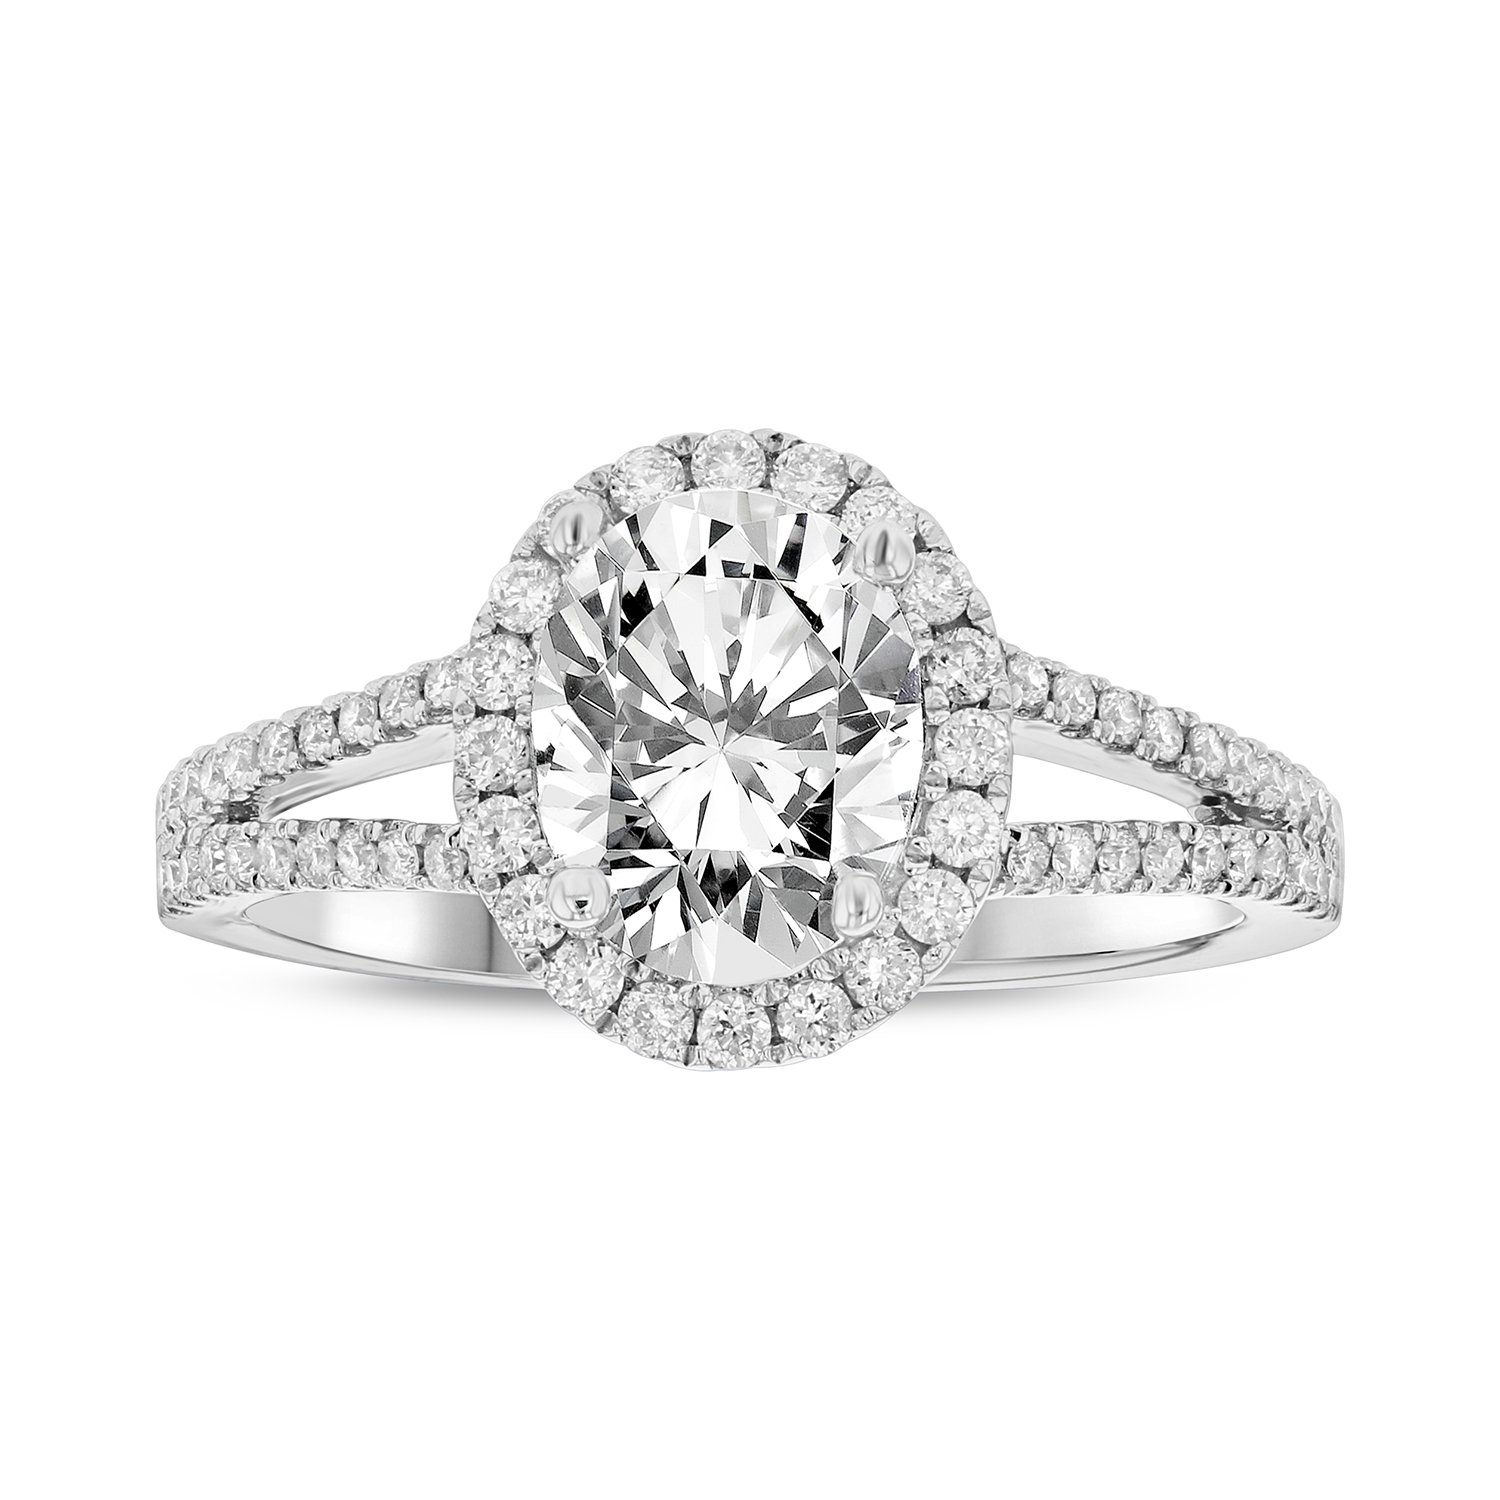 View 1.27ctw Diamond Engagement Ring in 18k White Gold 